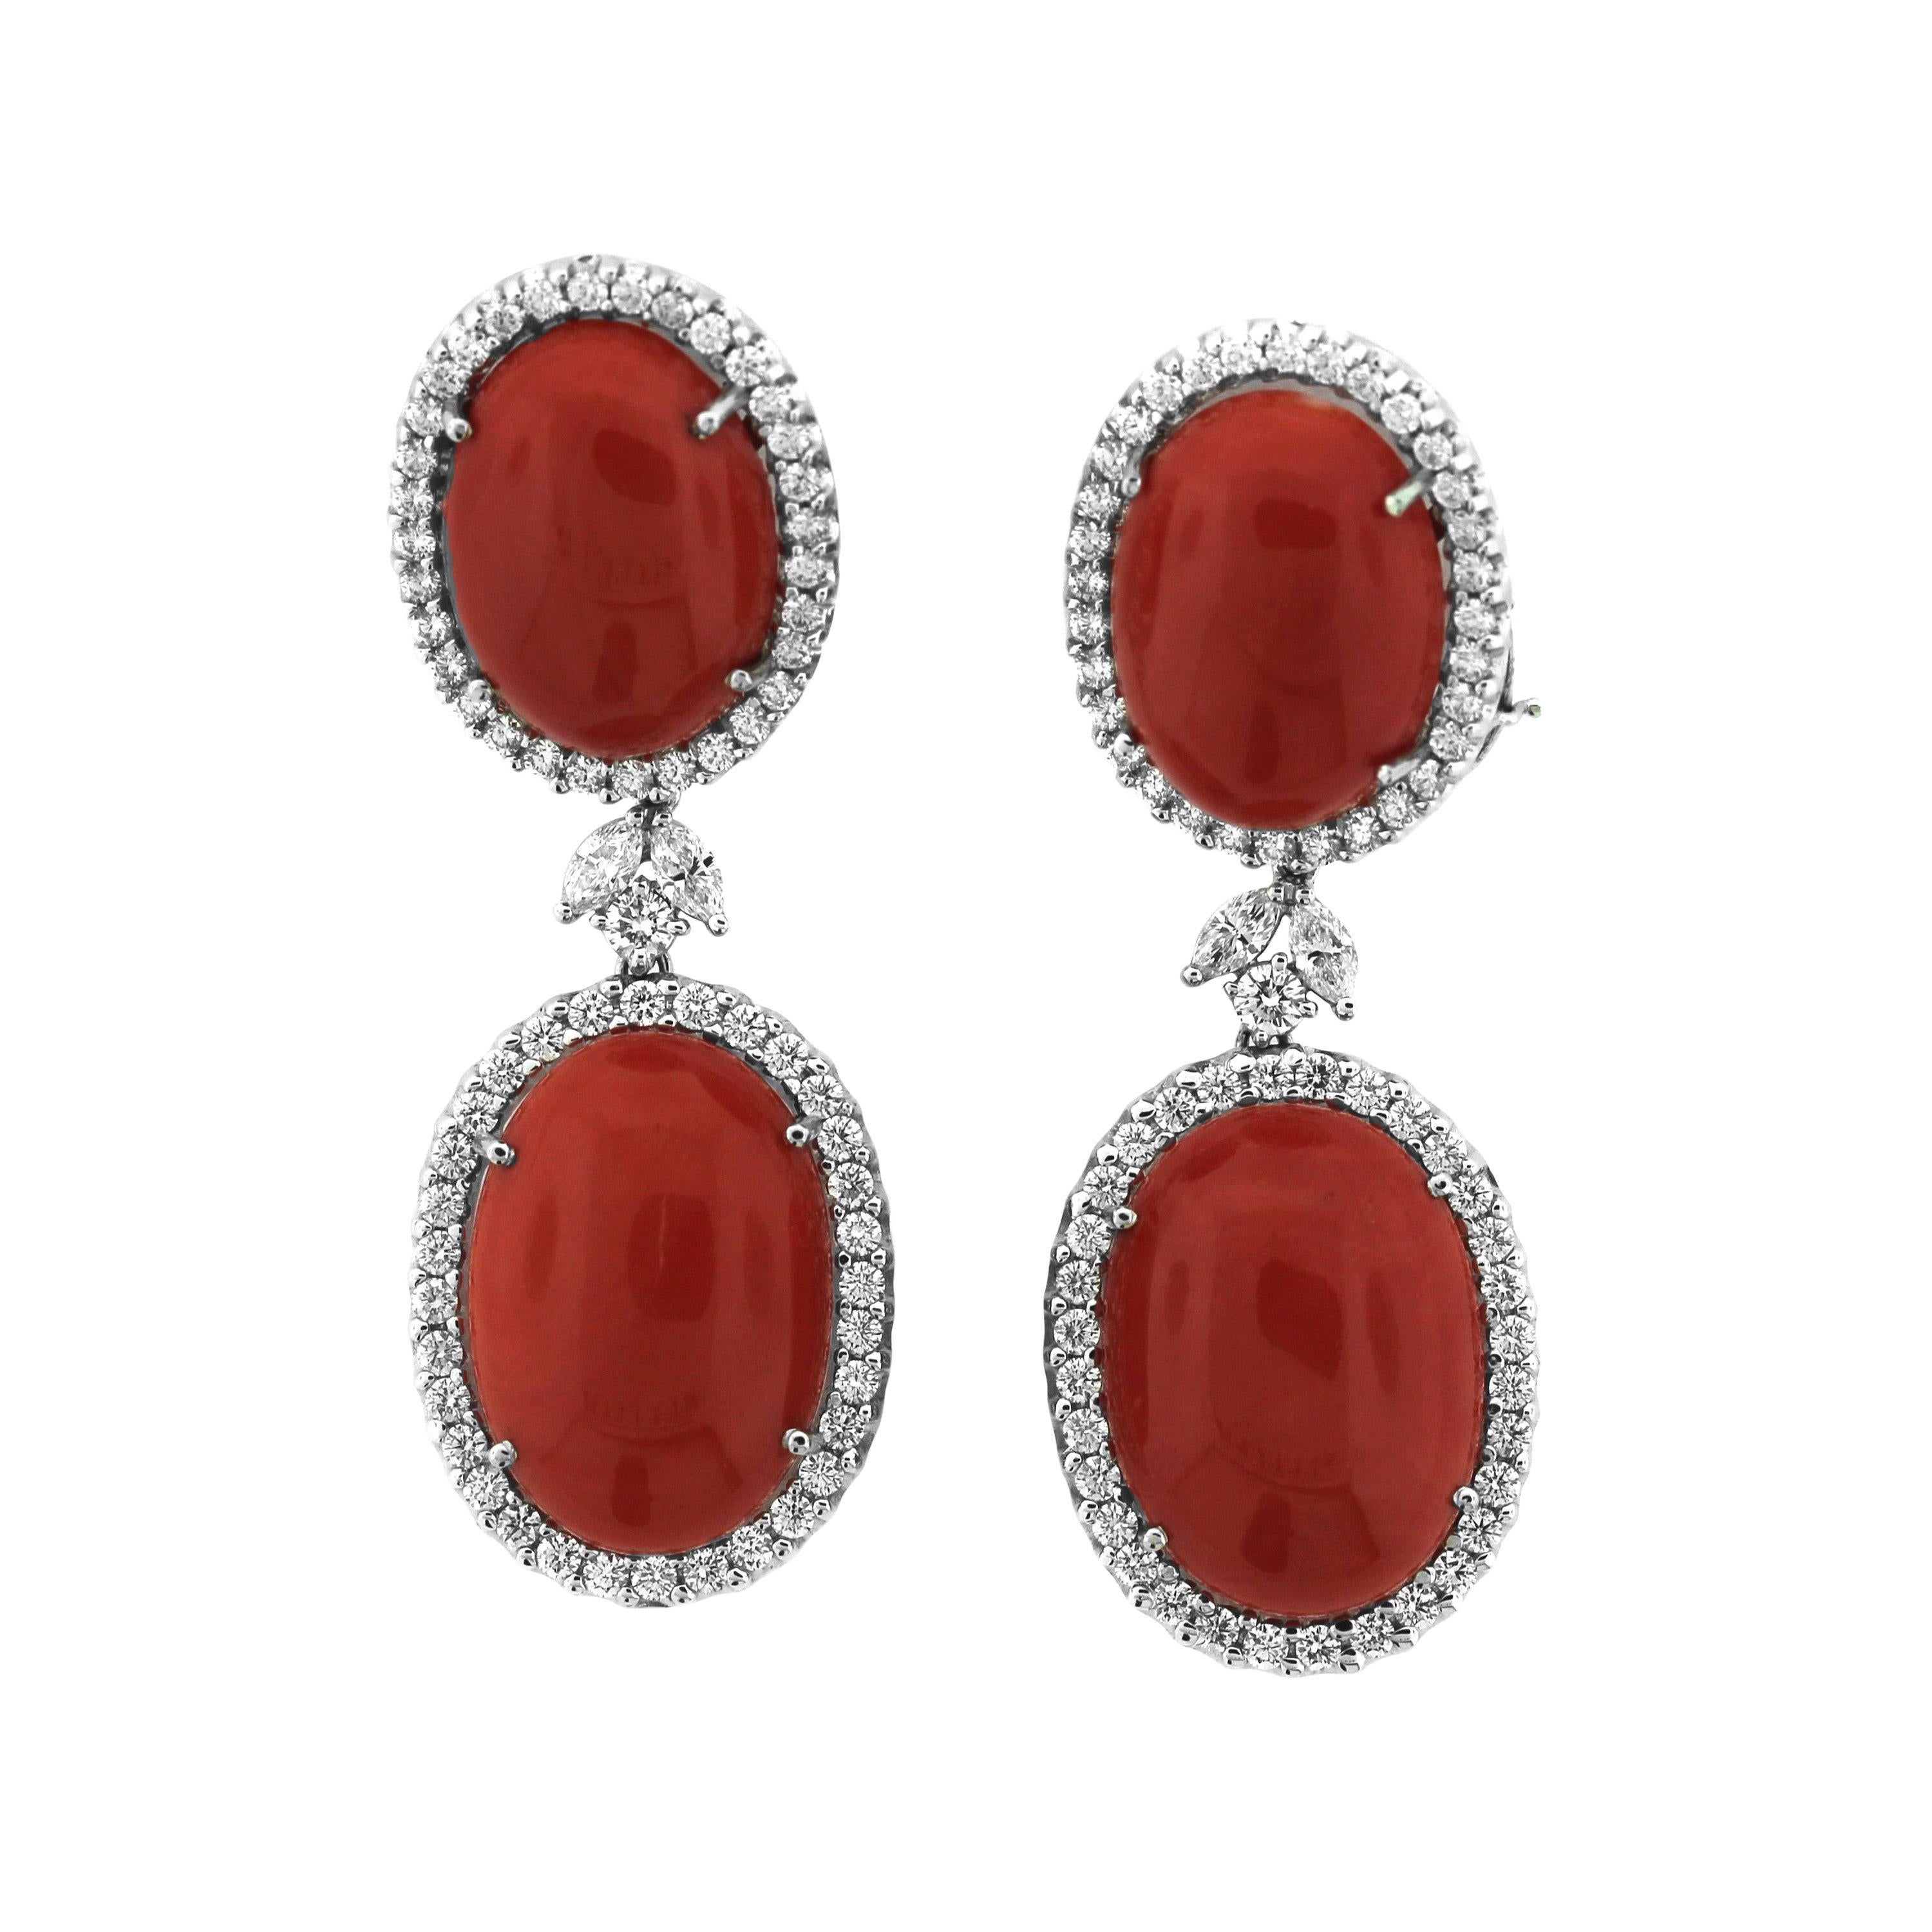 Coral and Diamond Drop Earrings with White Gold